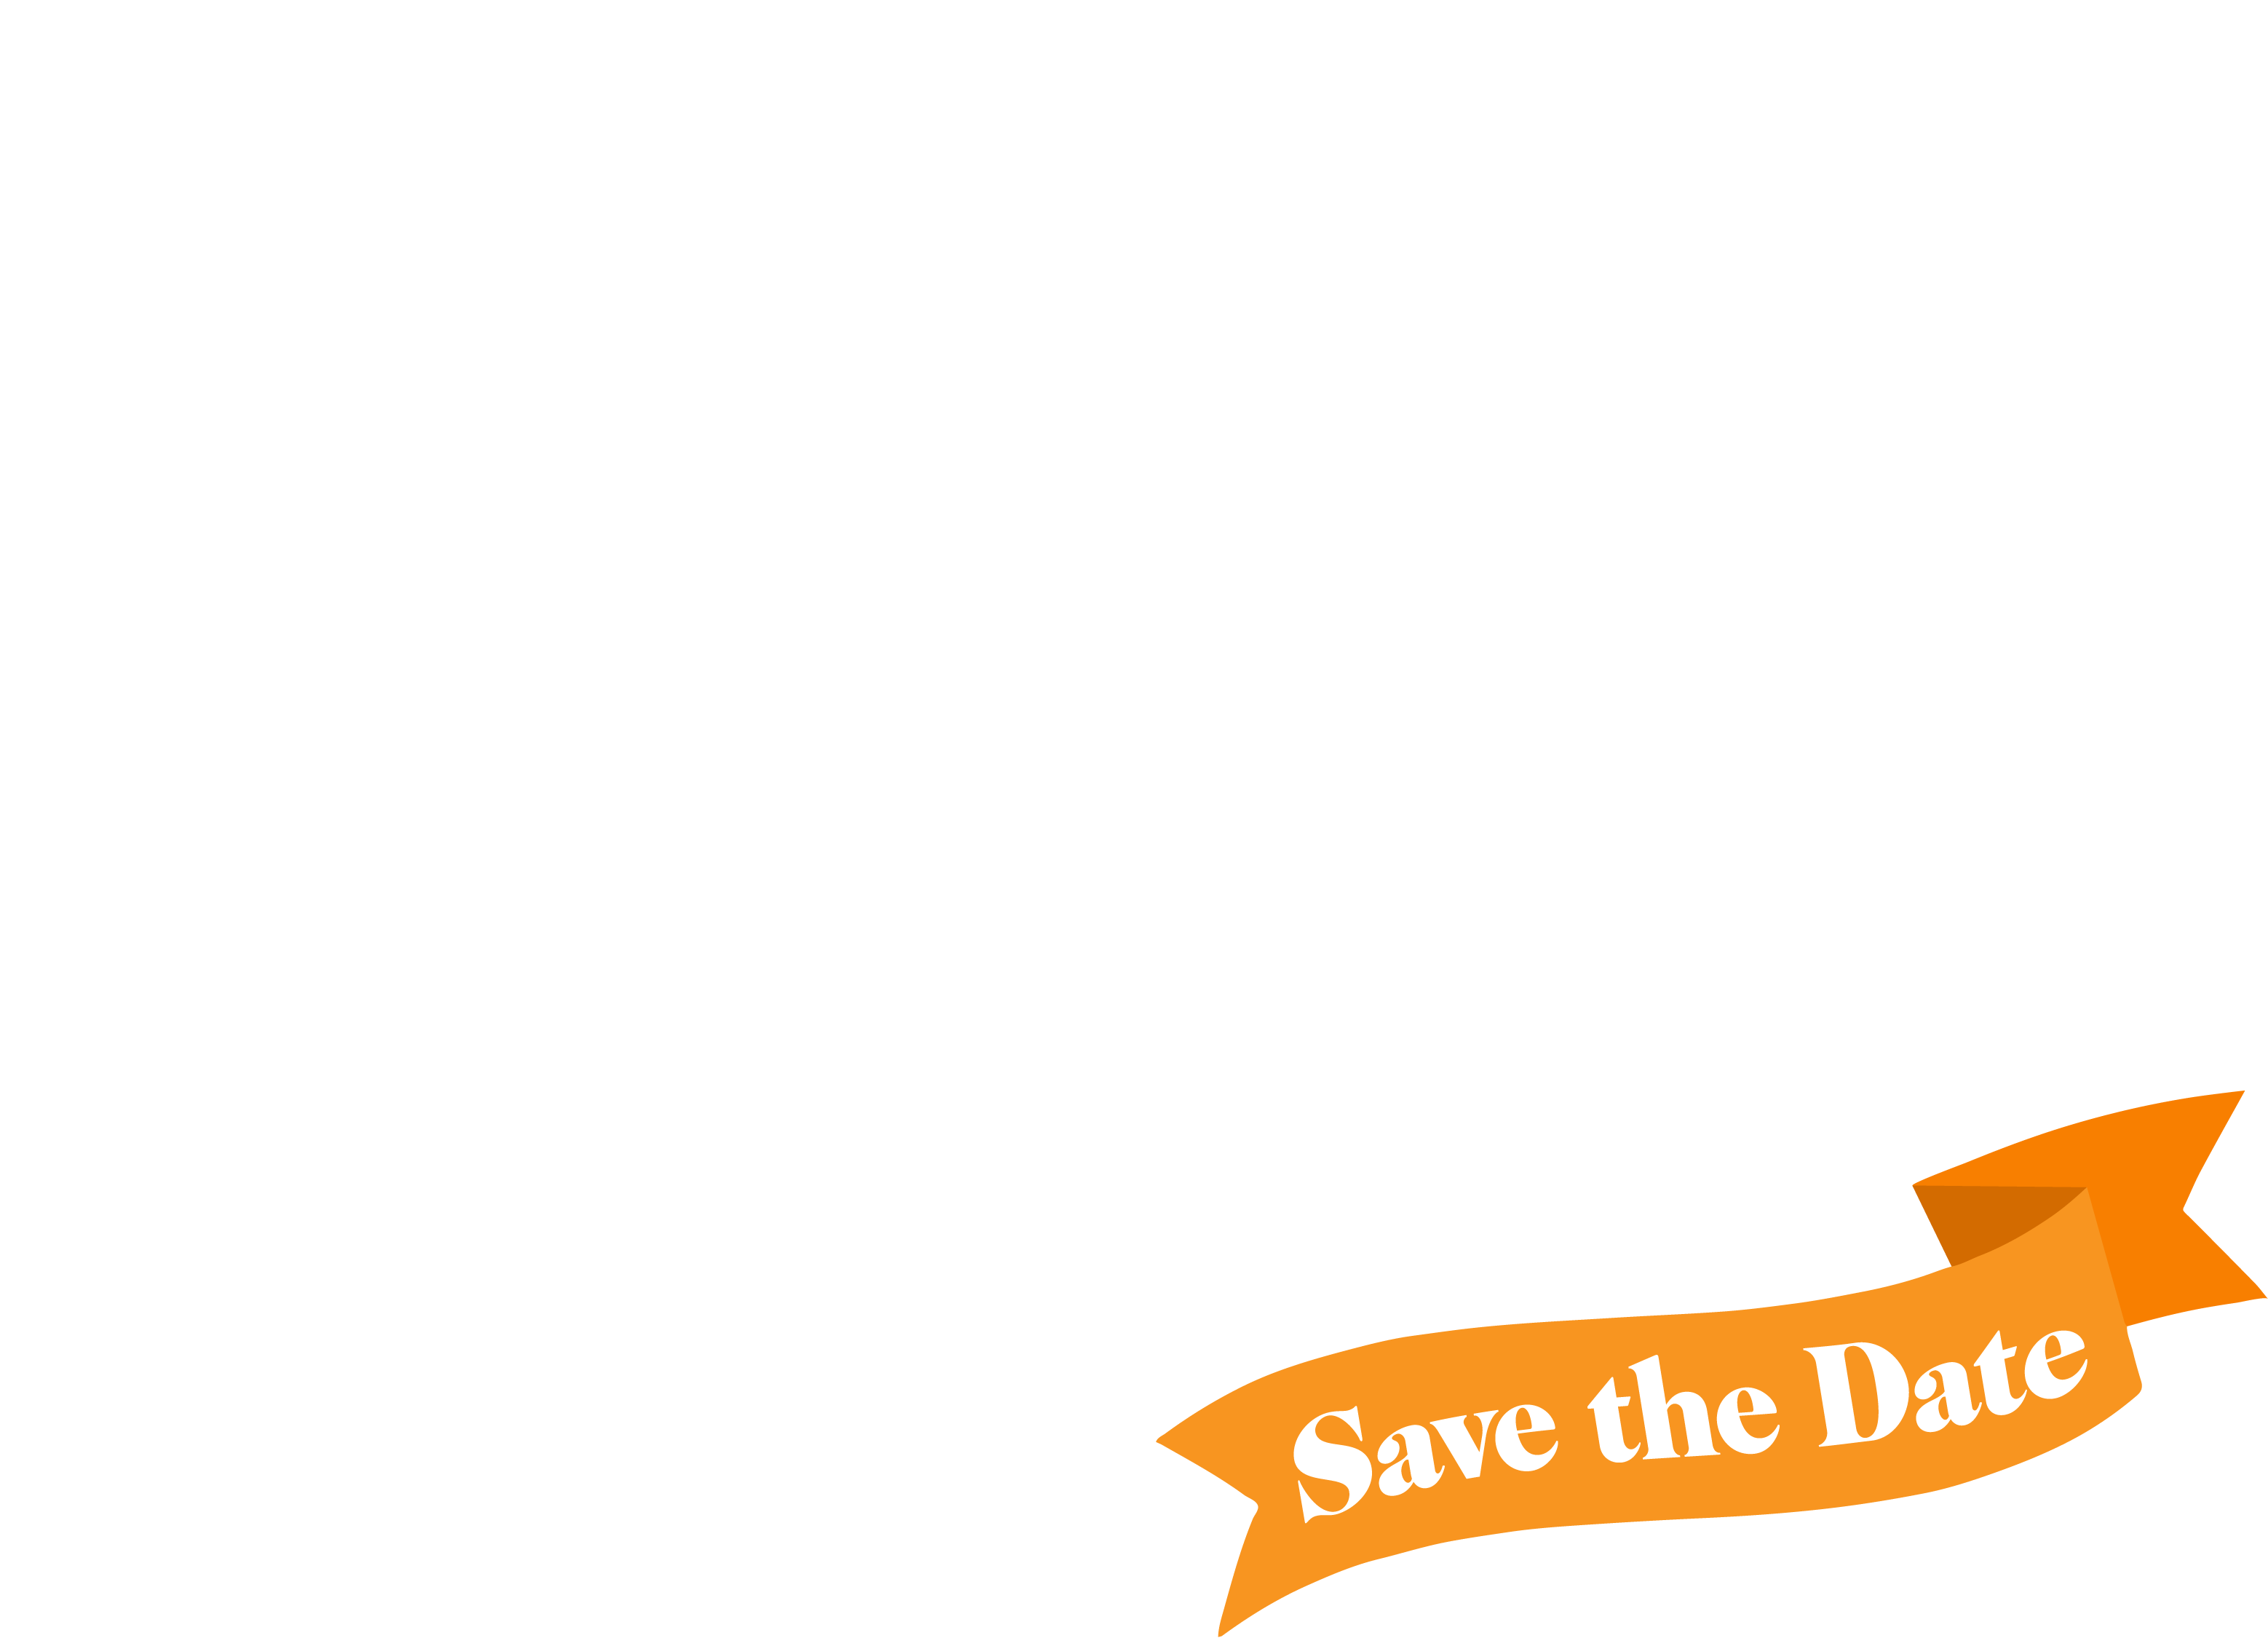 PaceDay 2023 logo with date: October 15, 2023